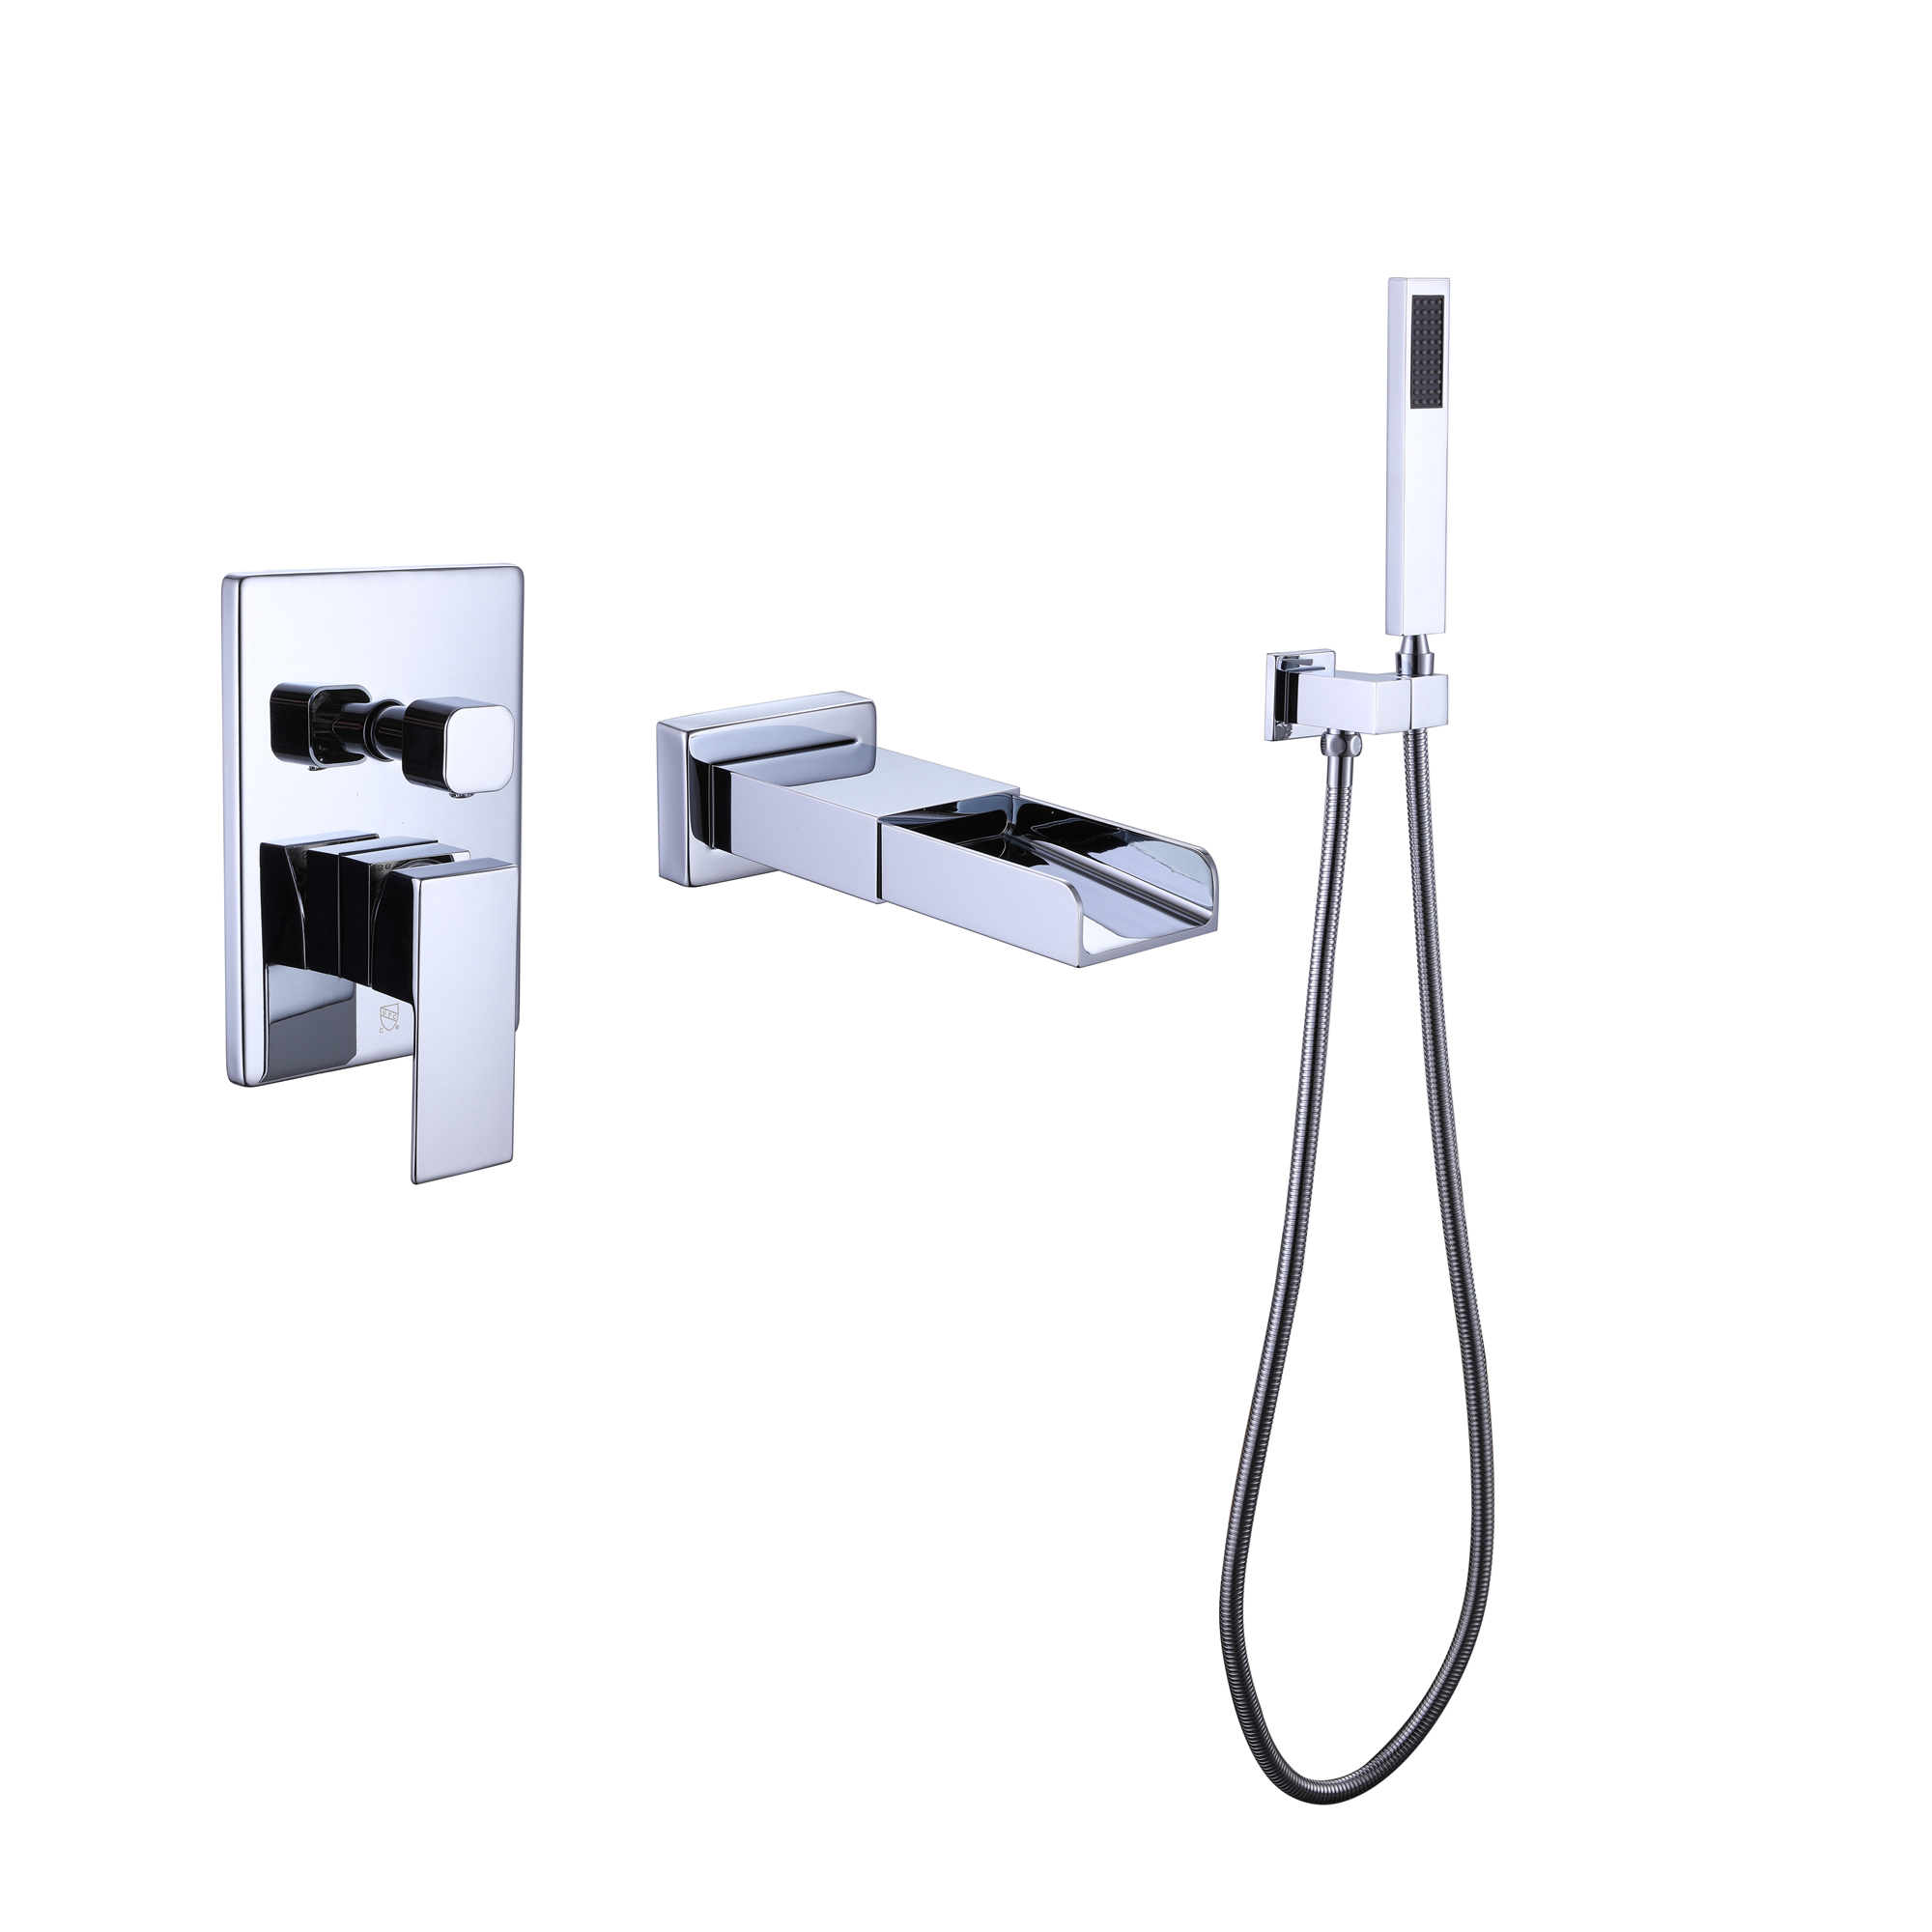 TrustMade Pressure-Balance Waterfall Single Handle Wall Mount Tub Faucet with Hand Shower, Chrome - 2W01-Boyel Living